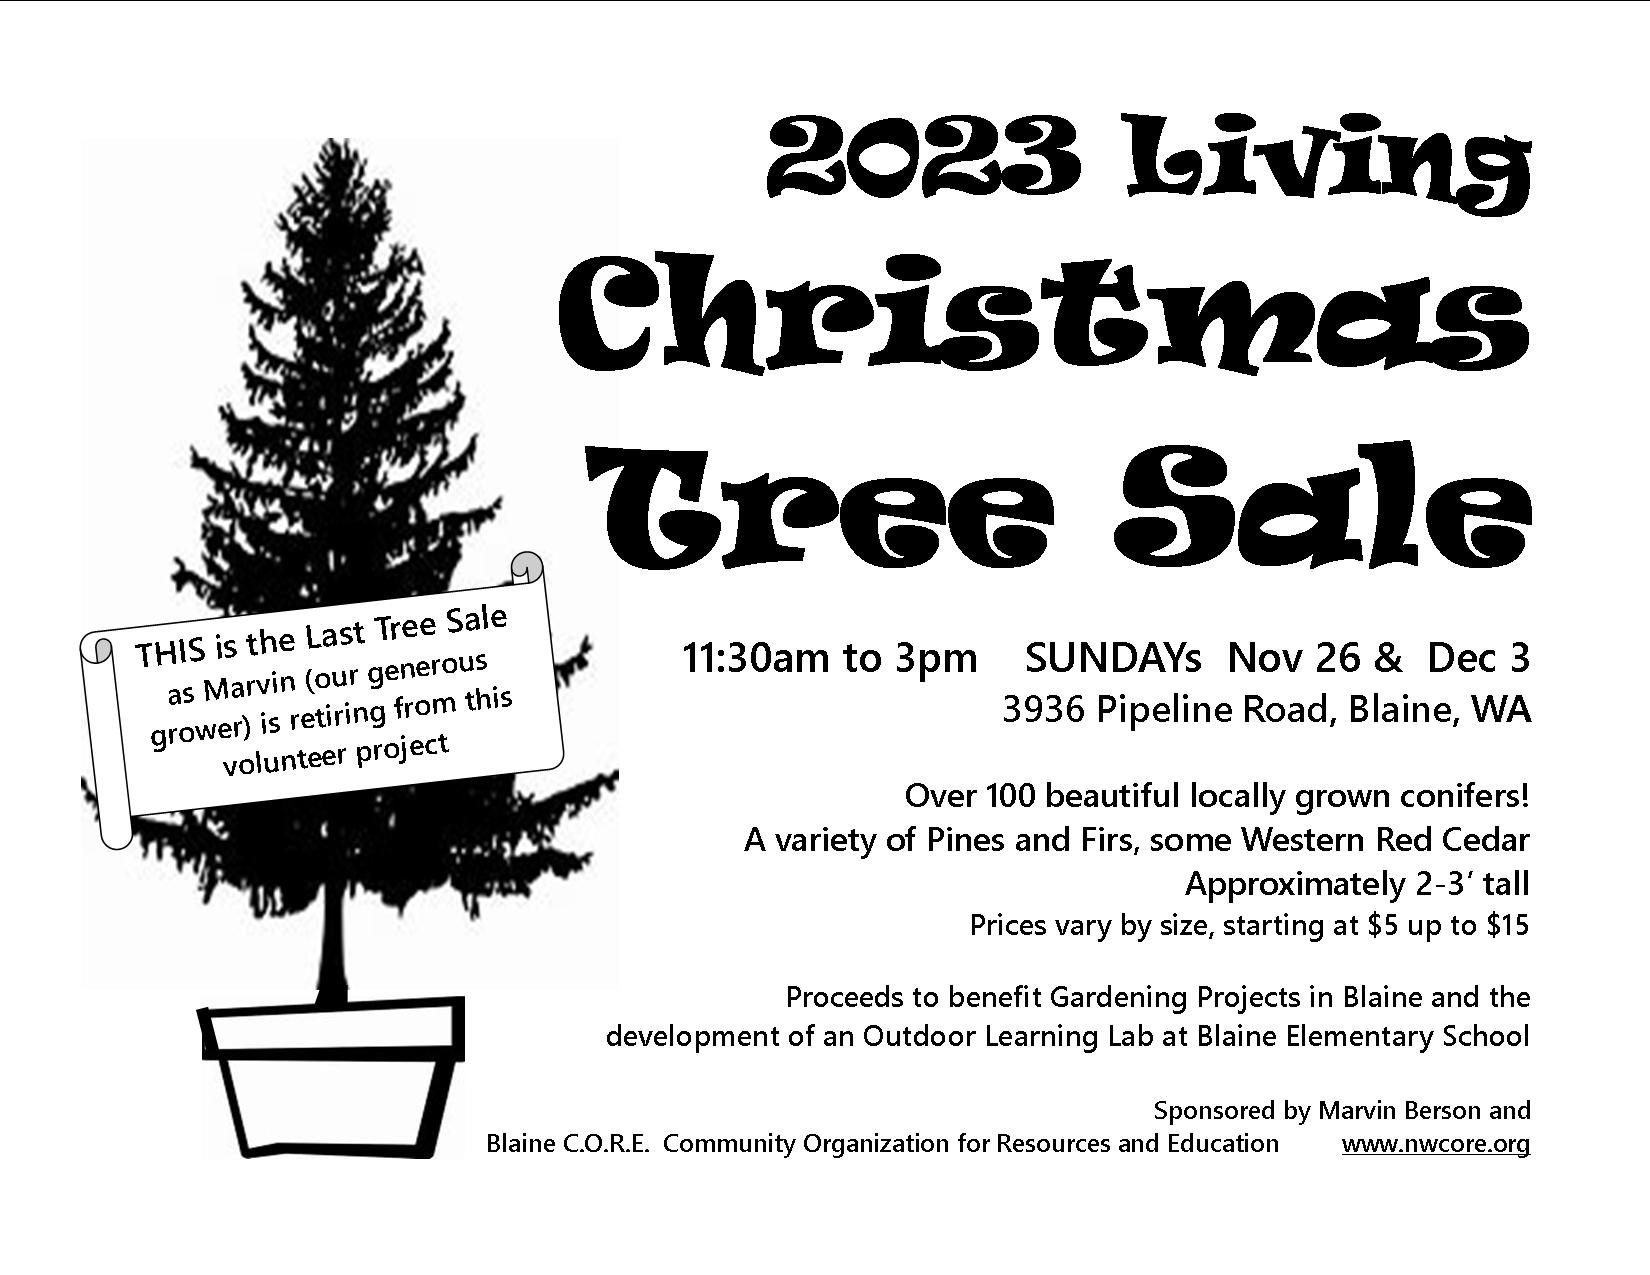 2023 Flyer for Living Christmas Tree Sale, 11:30am-3pm, Sundays - Nov. 26 and Dec. 3 at 3936 Pipeline Rd, Blaine, Priced from $5-$15 each. Approx. 100+ availableProceeds benefit Blaine CORE and Blaine Elem. Learning Lab